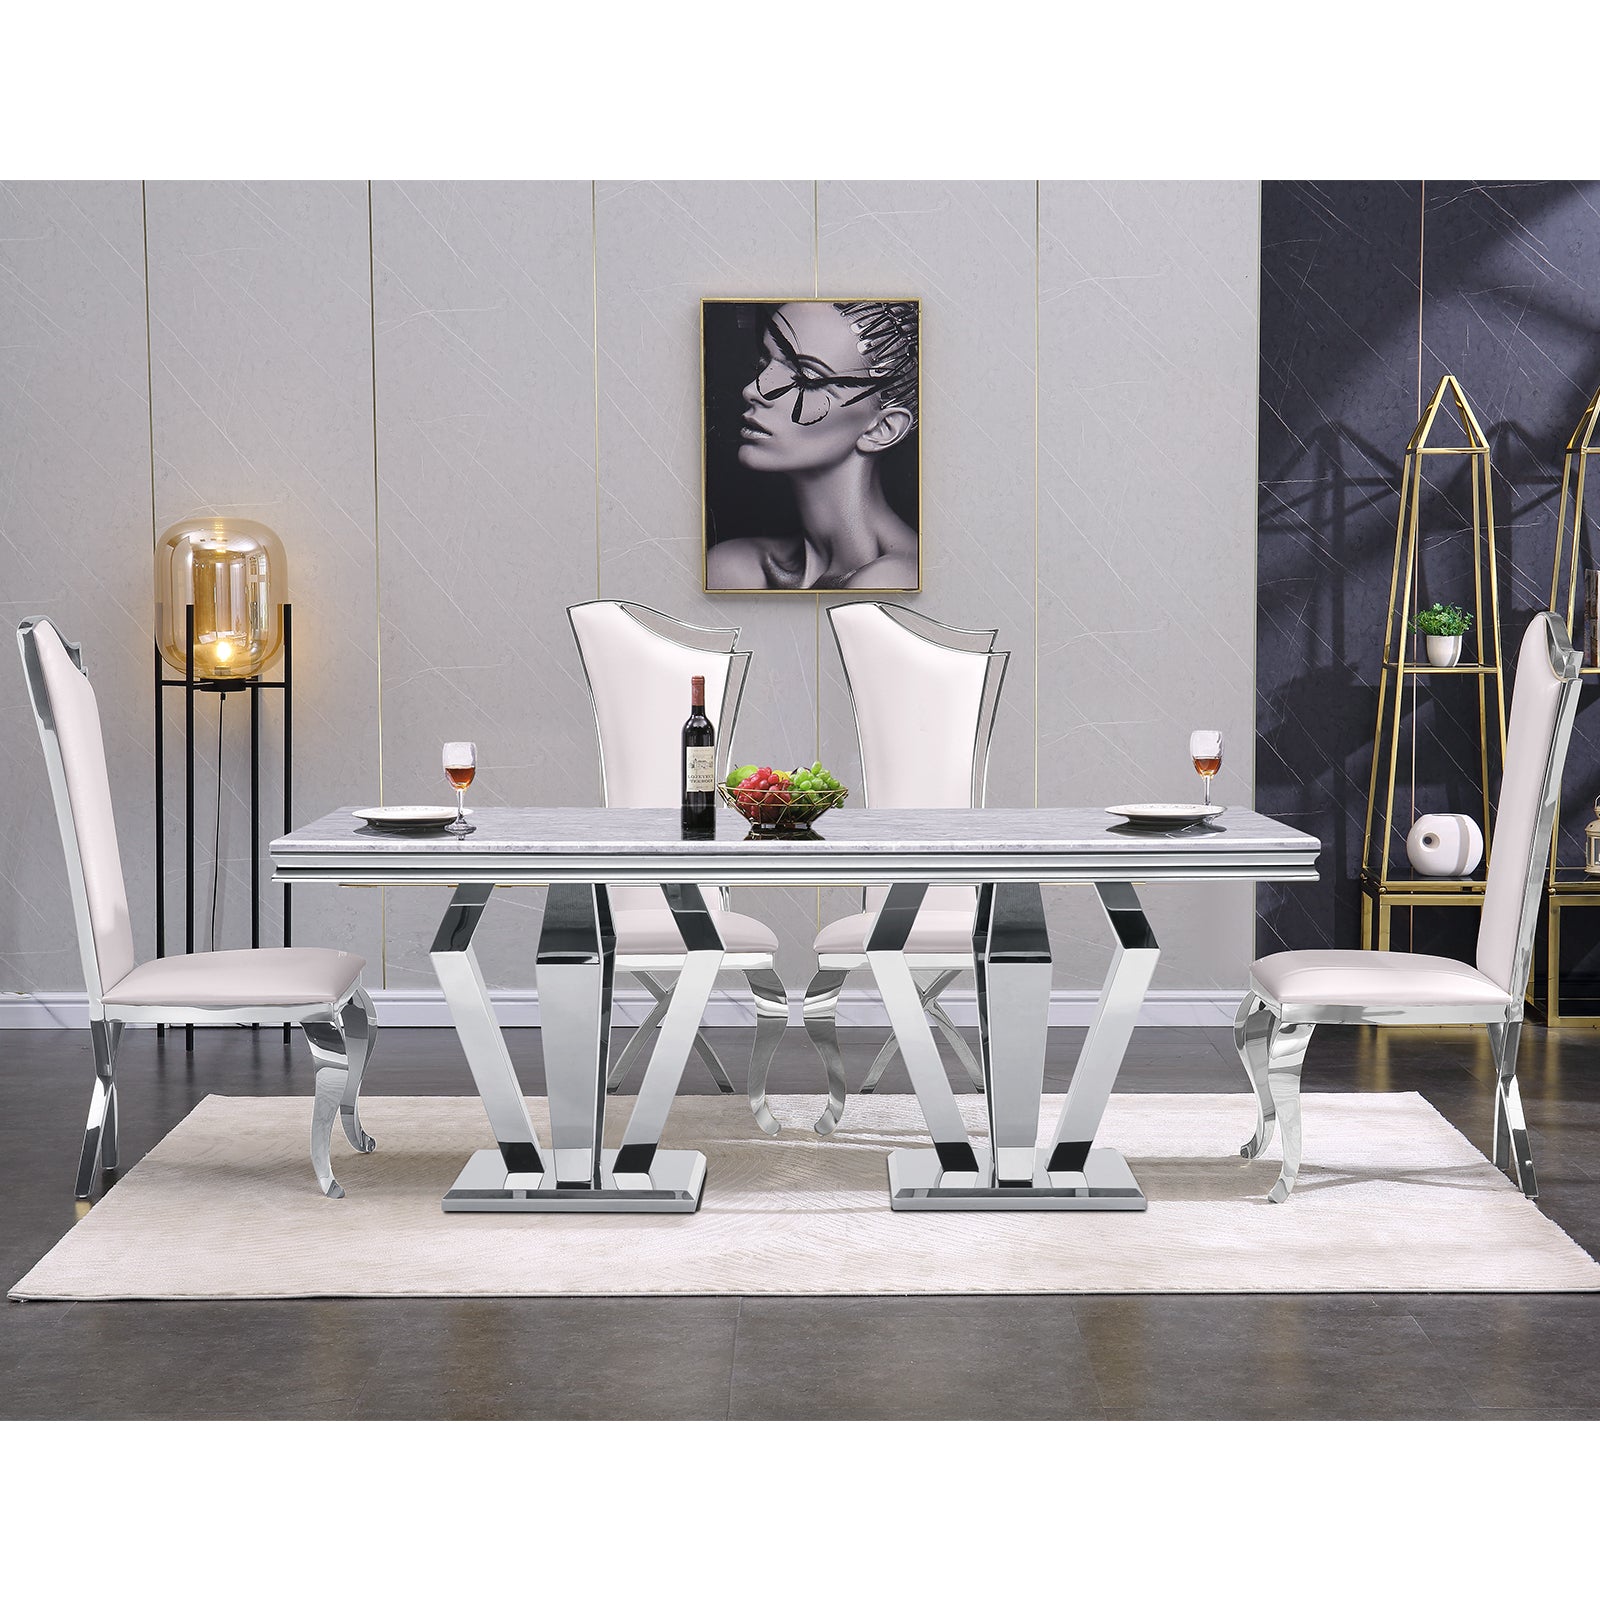 Wholesale White Leather Upholstered Dining Chairs with Silver Metal Legs